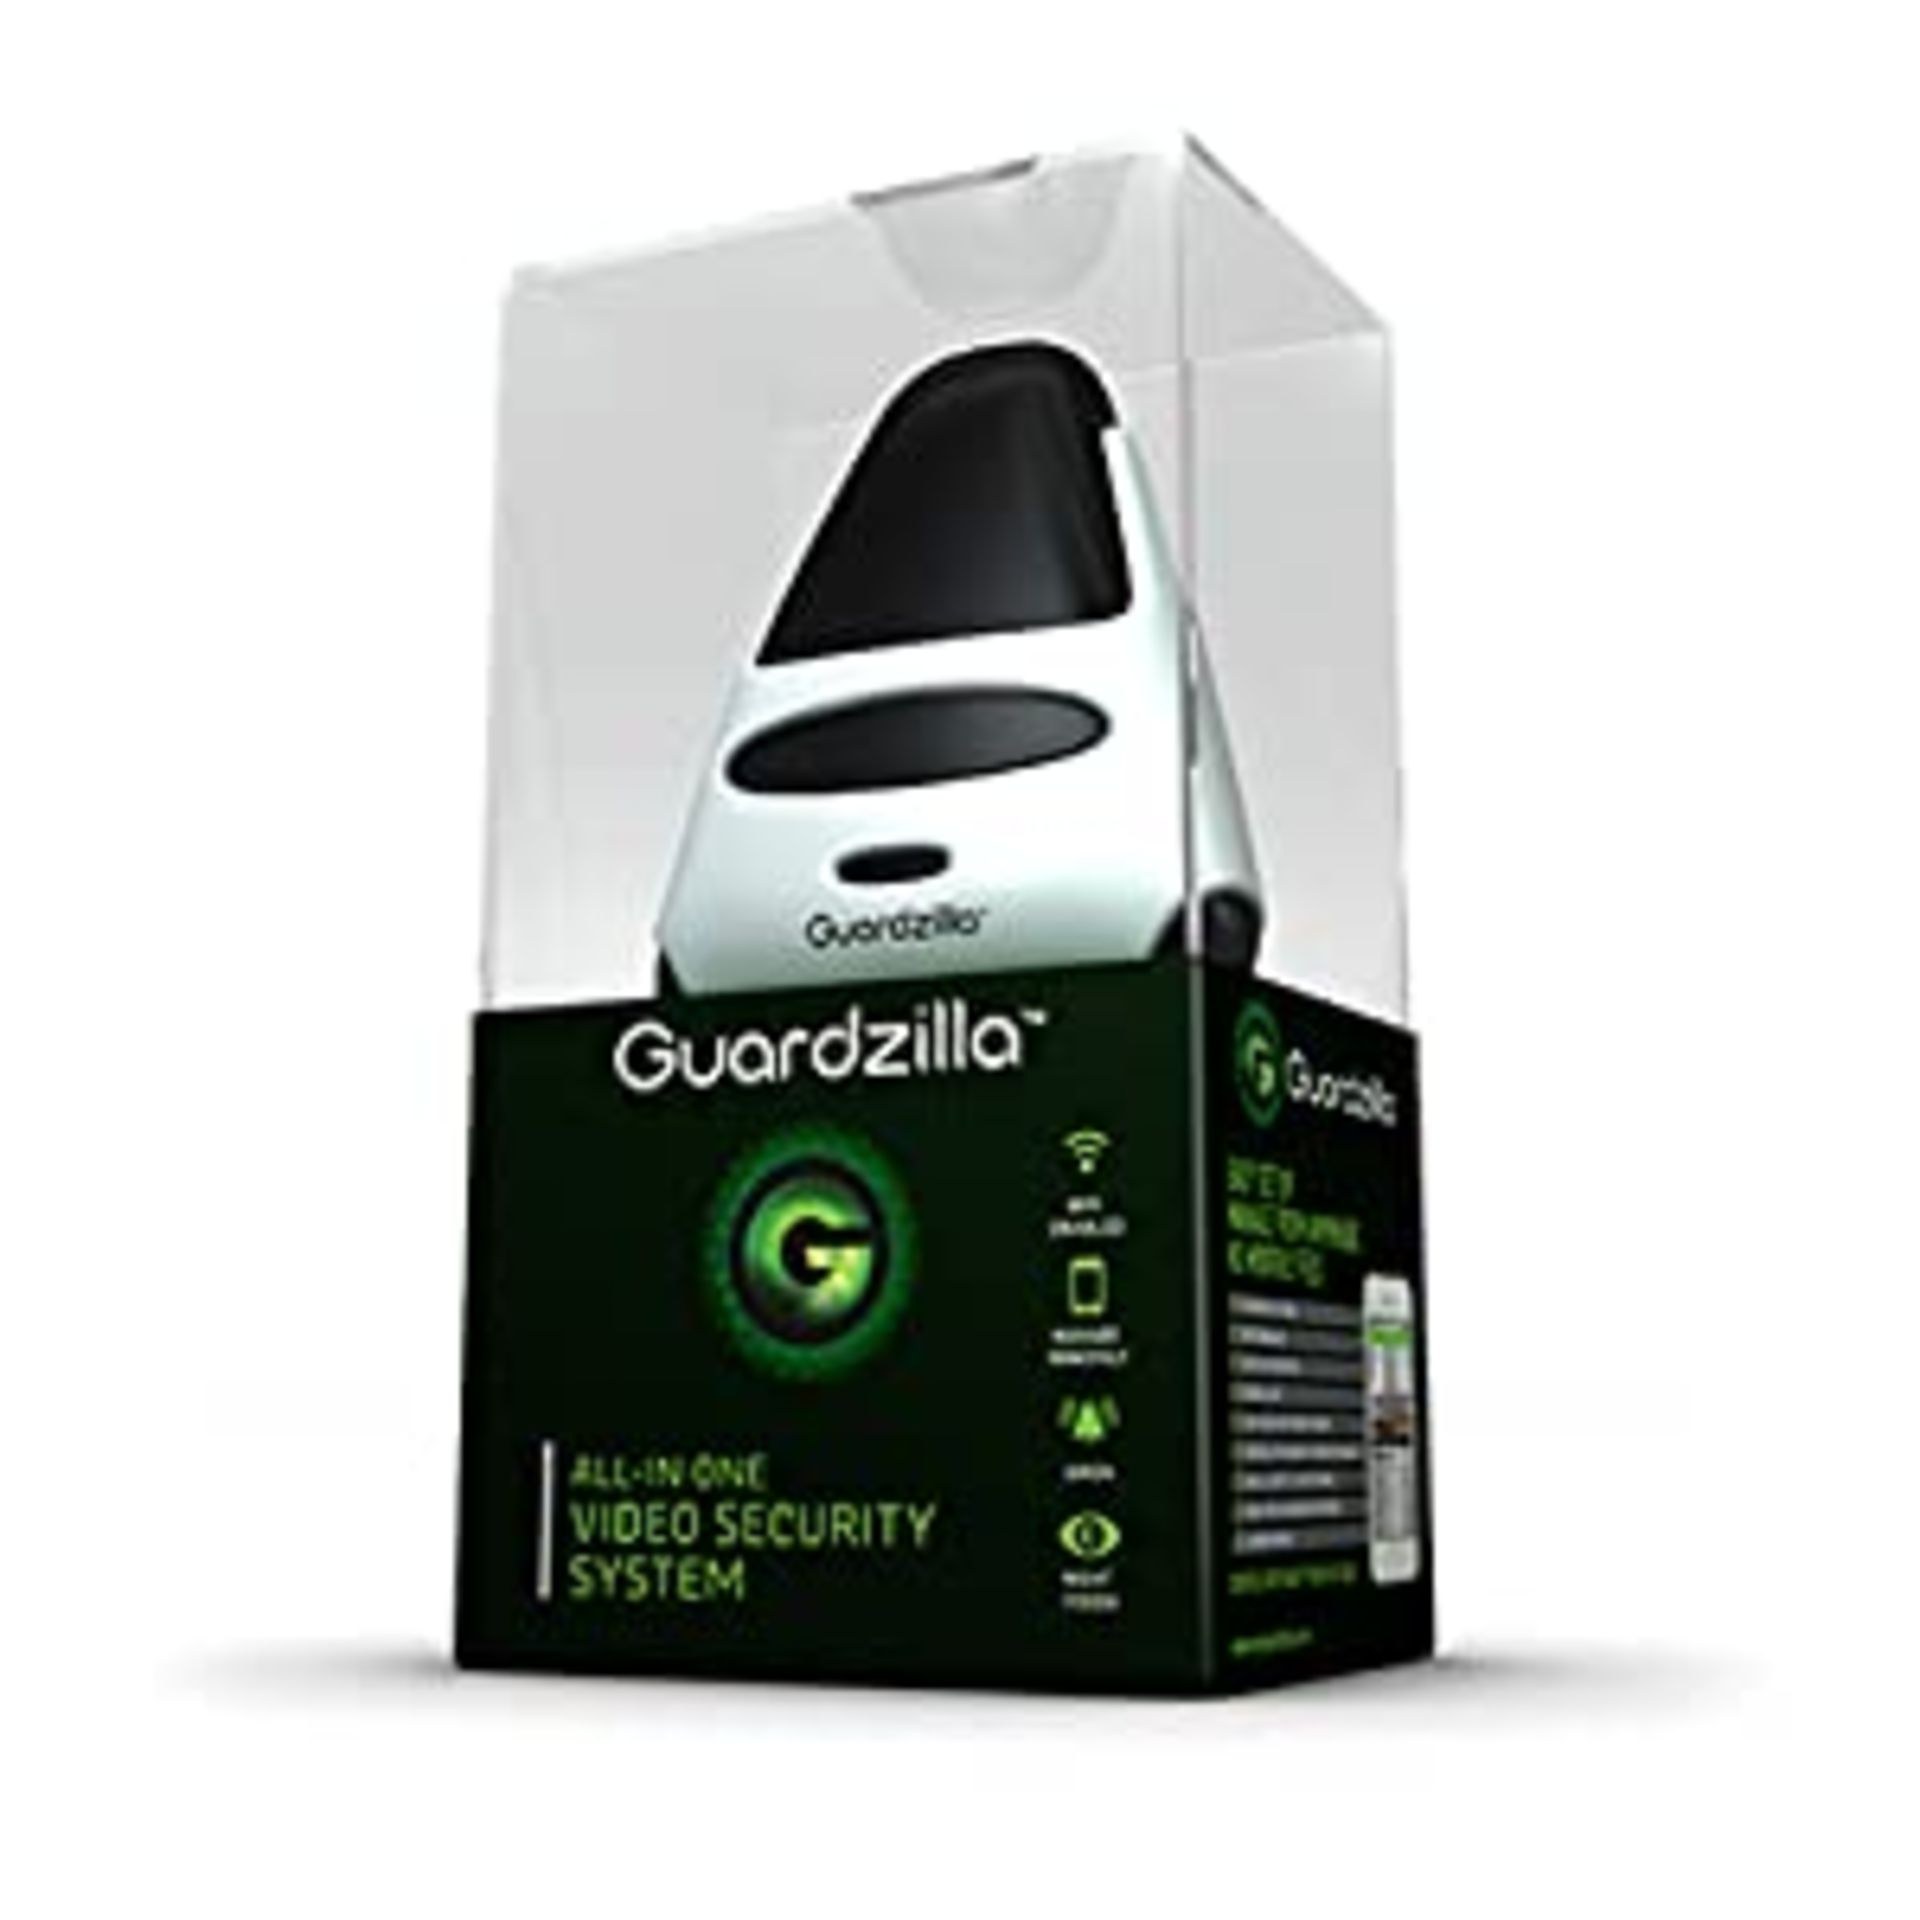 5 x Guardzilla All-In-One HD Security System Including Camera + Siren + Smartphone Remote Capability - Image 3 of 5